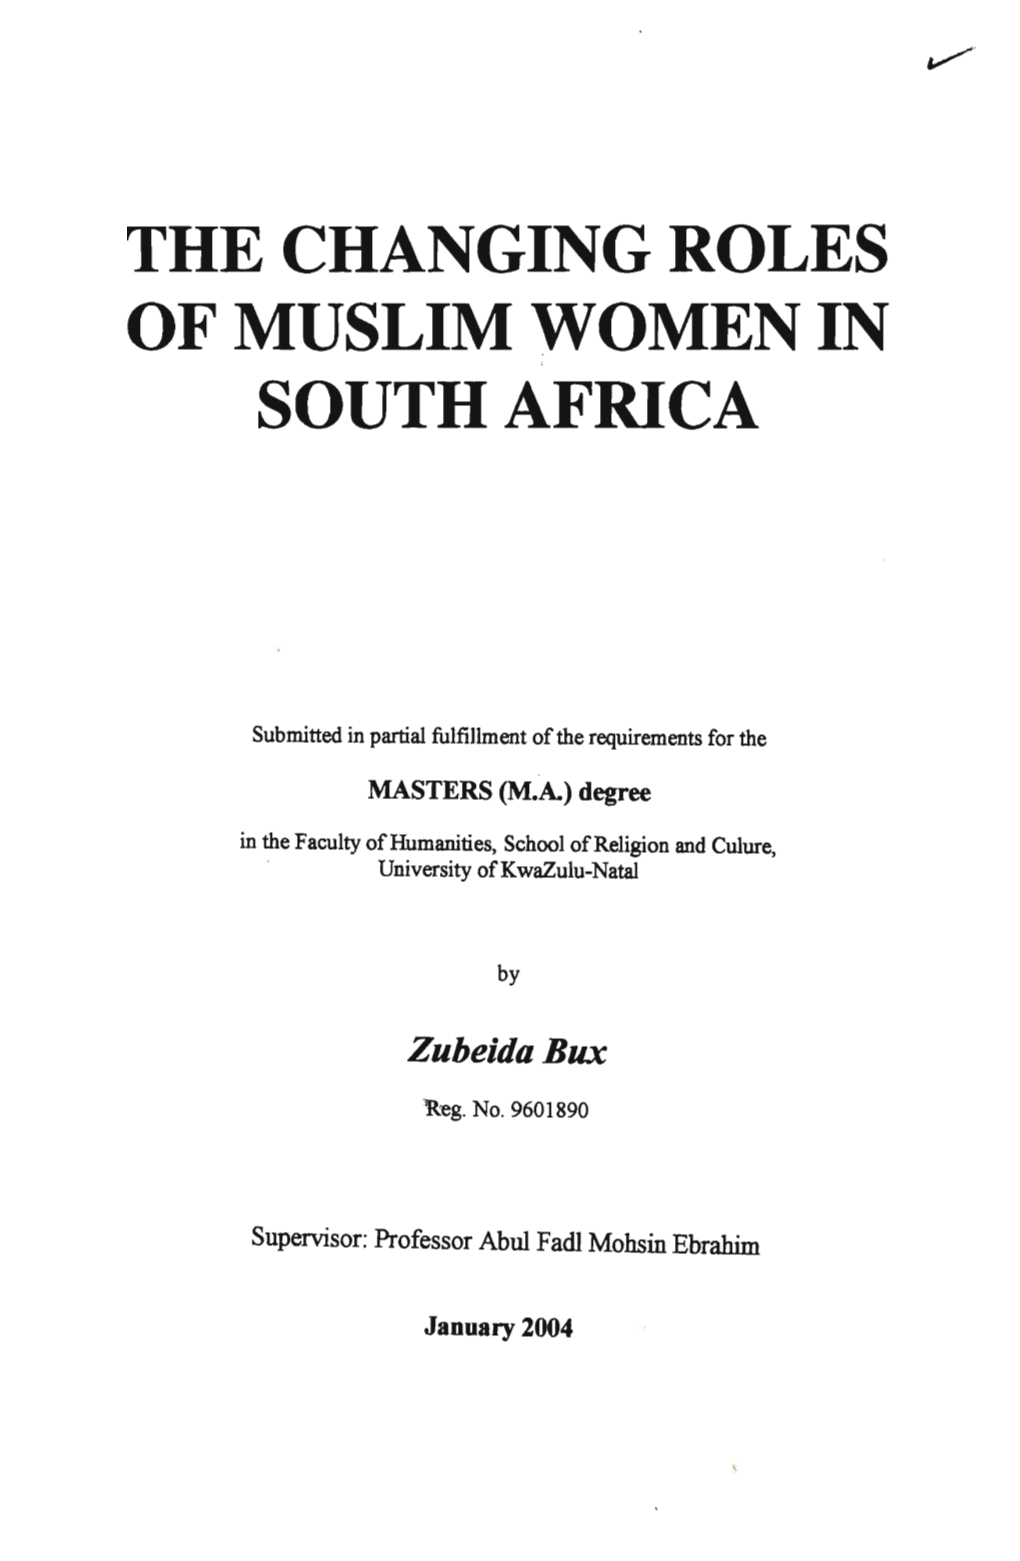 The Changing Roles of Muslim Women in South Africa